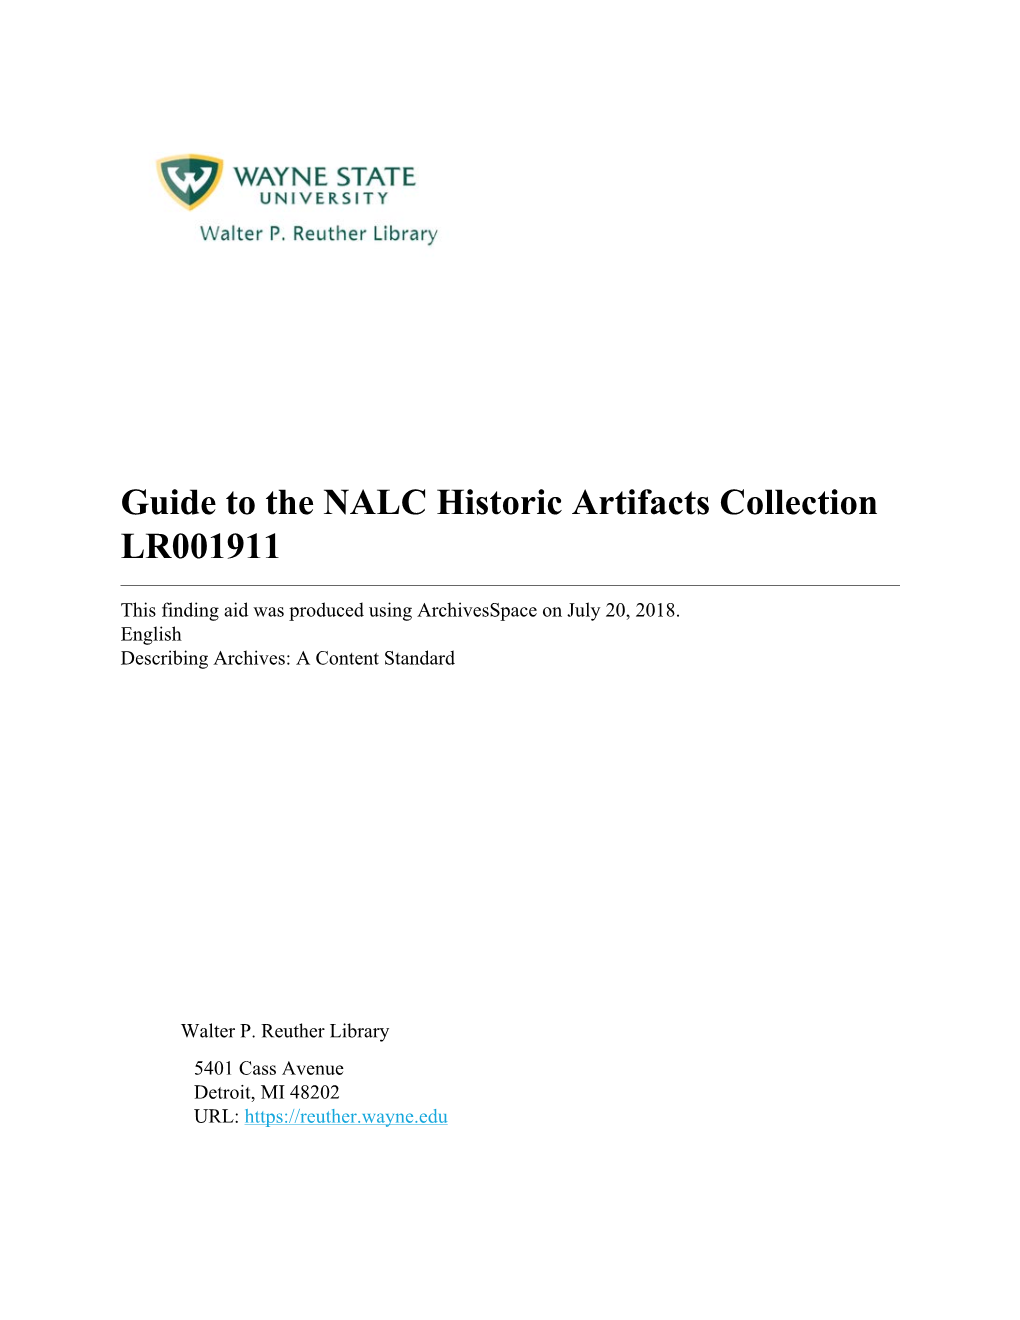 NALC Historic Artifacts Collection LR001911